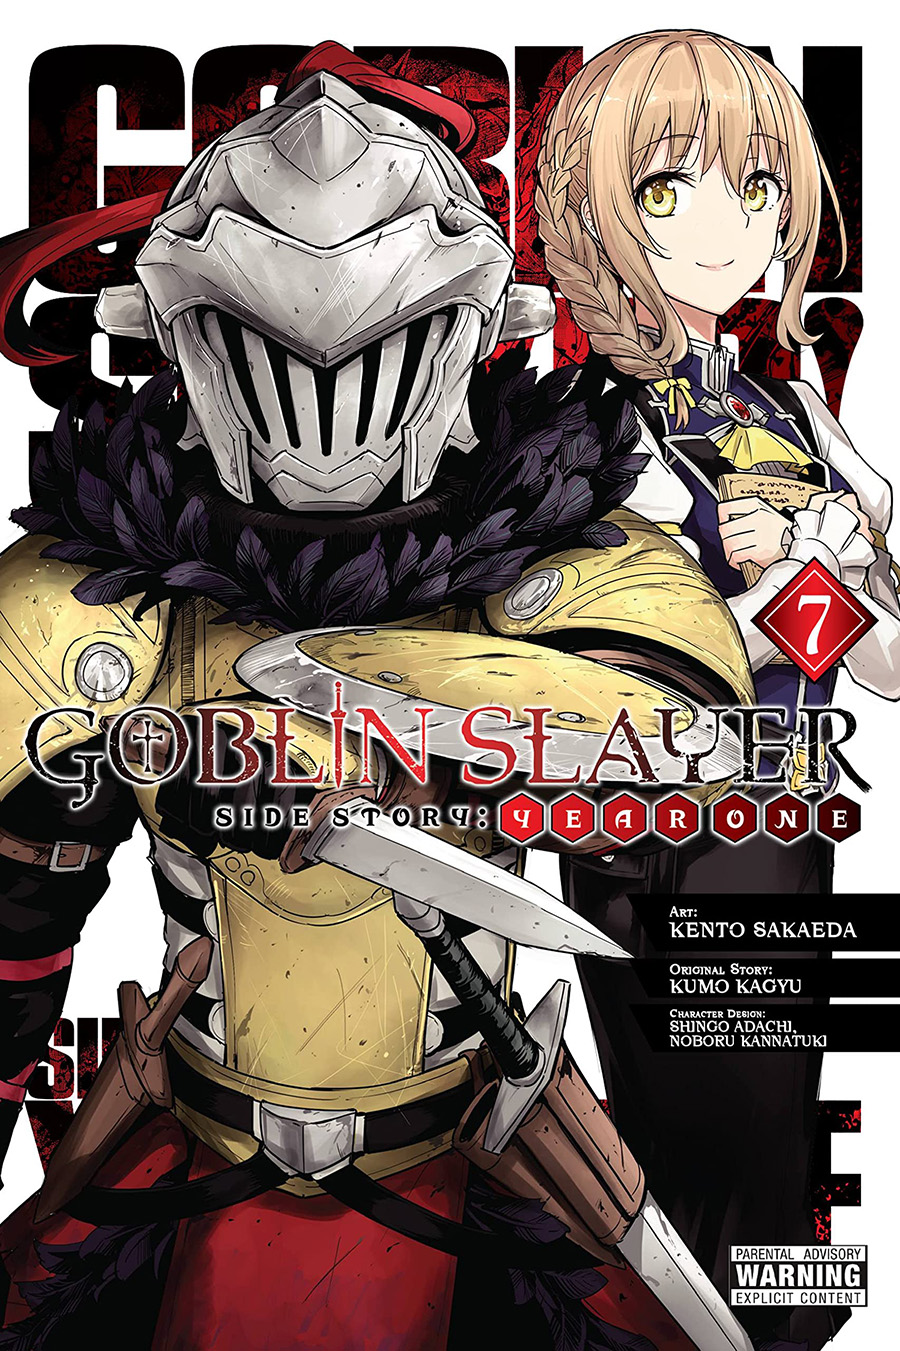 Goblin Slayer Side Story Year One Vol 7 GN